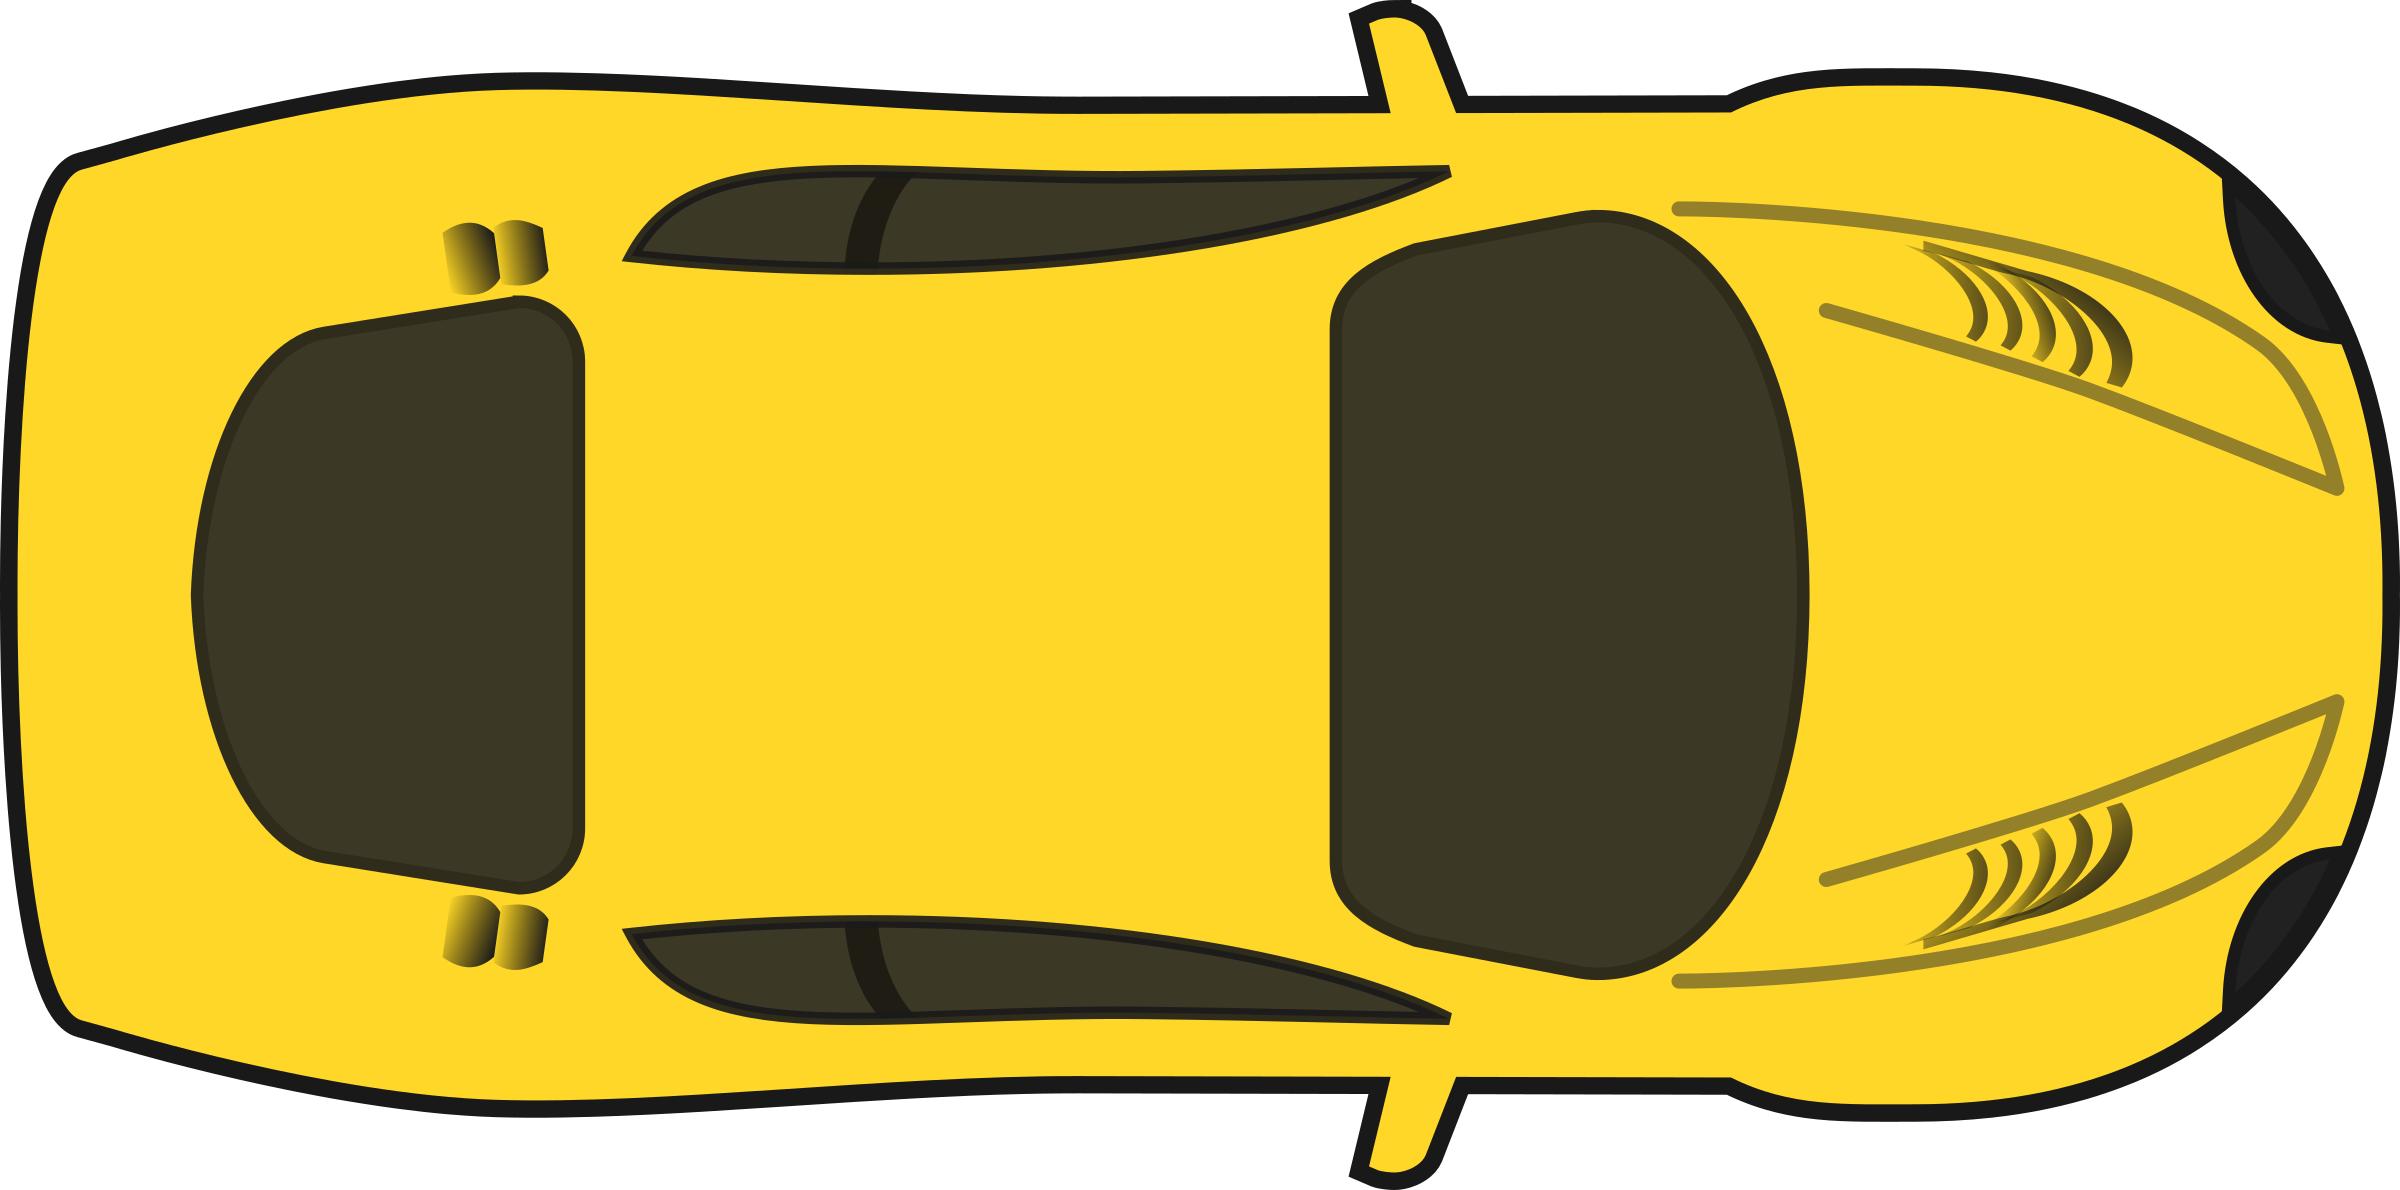 Yellow Racing Car (Top View) PNG icons